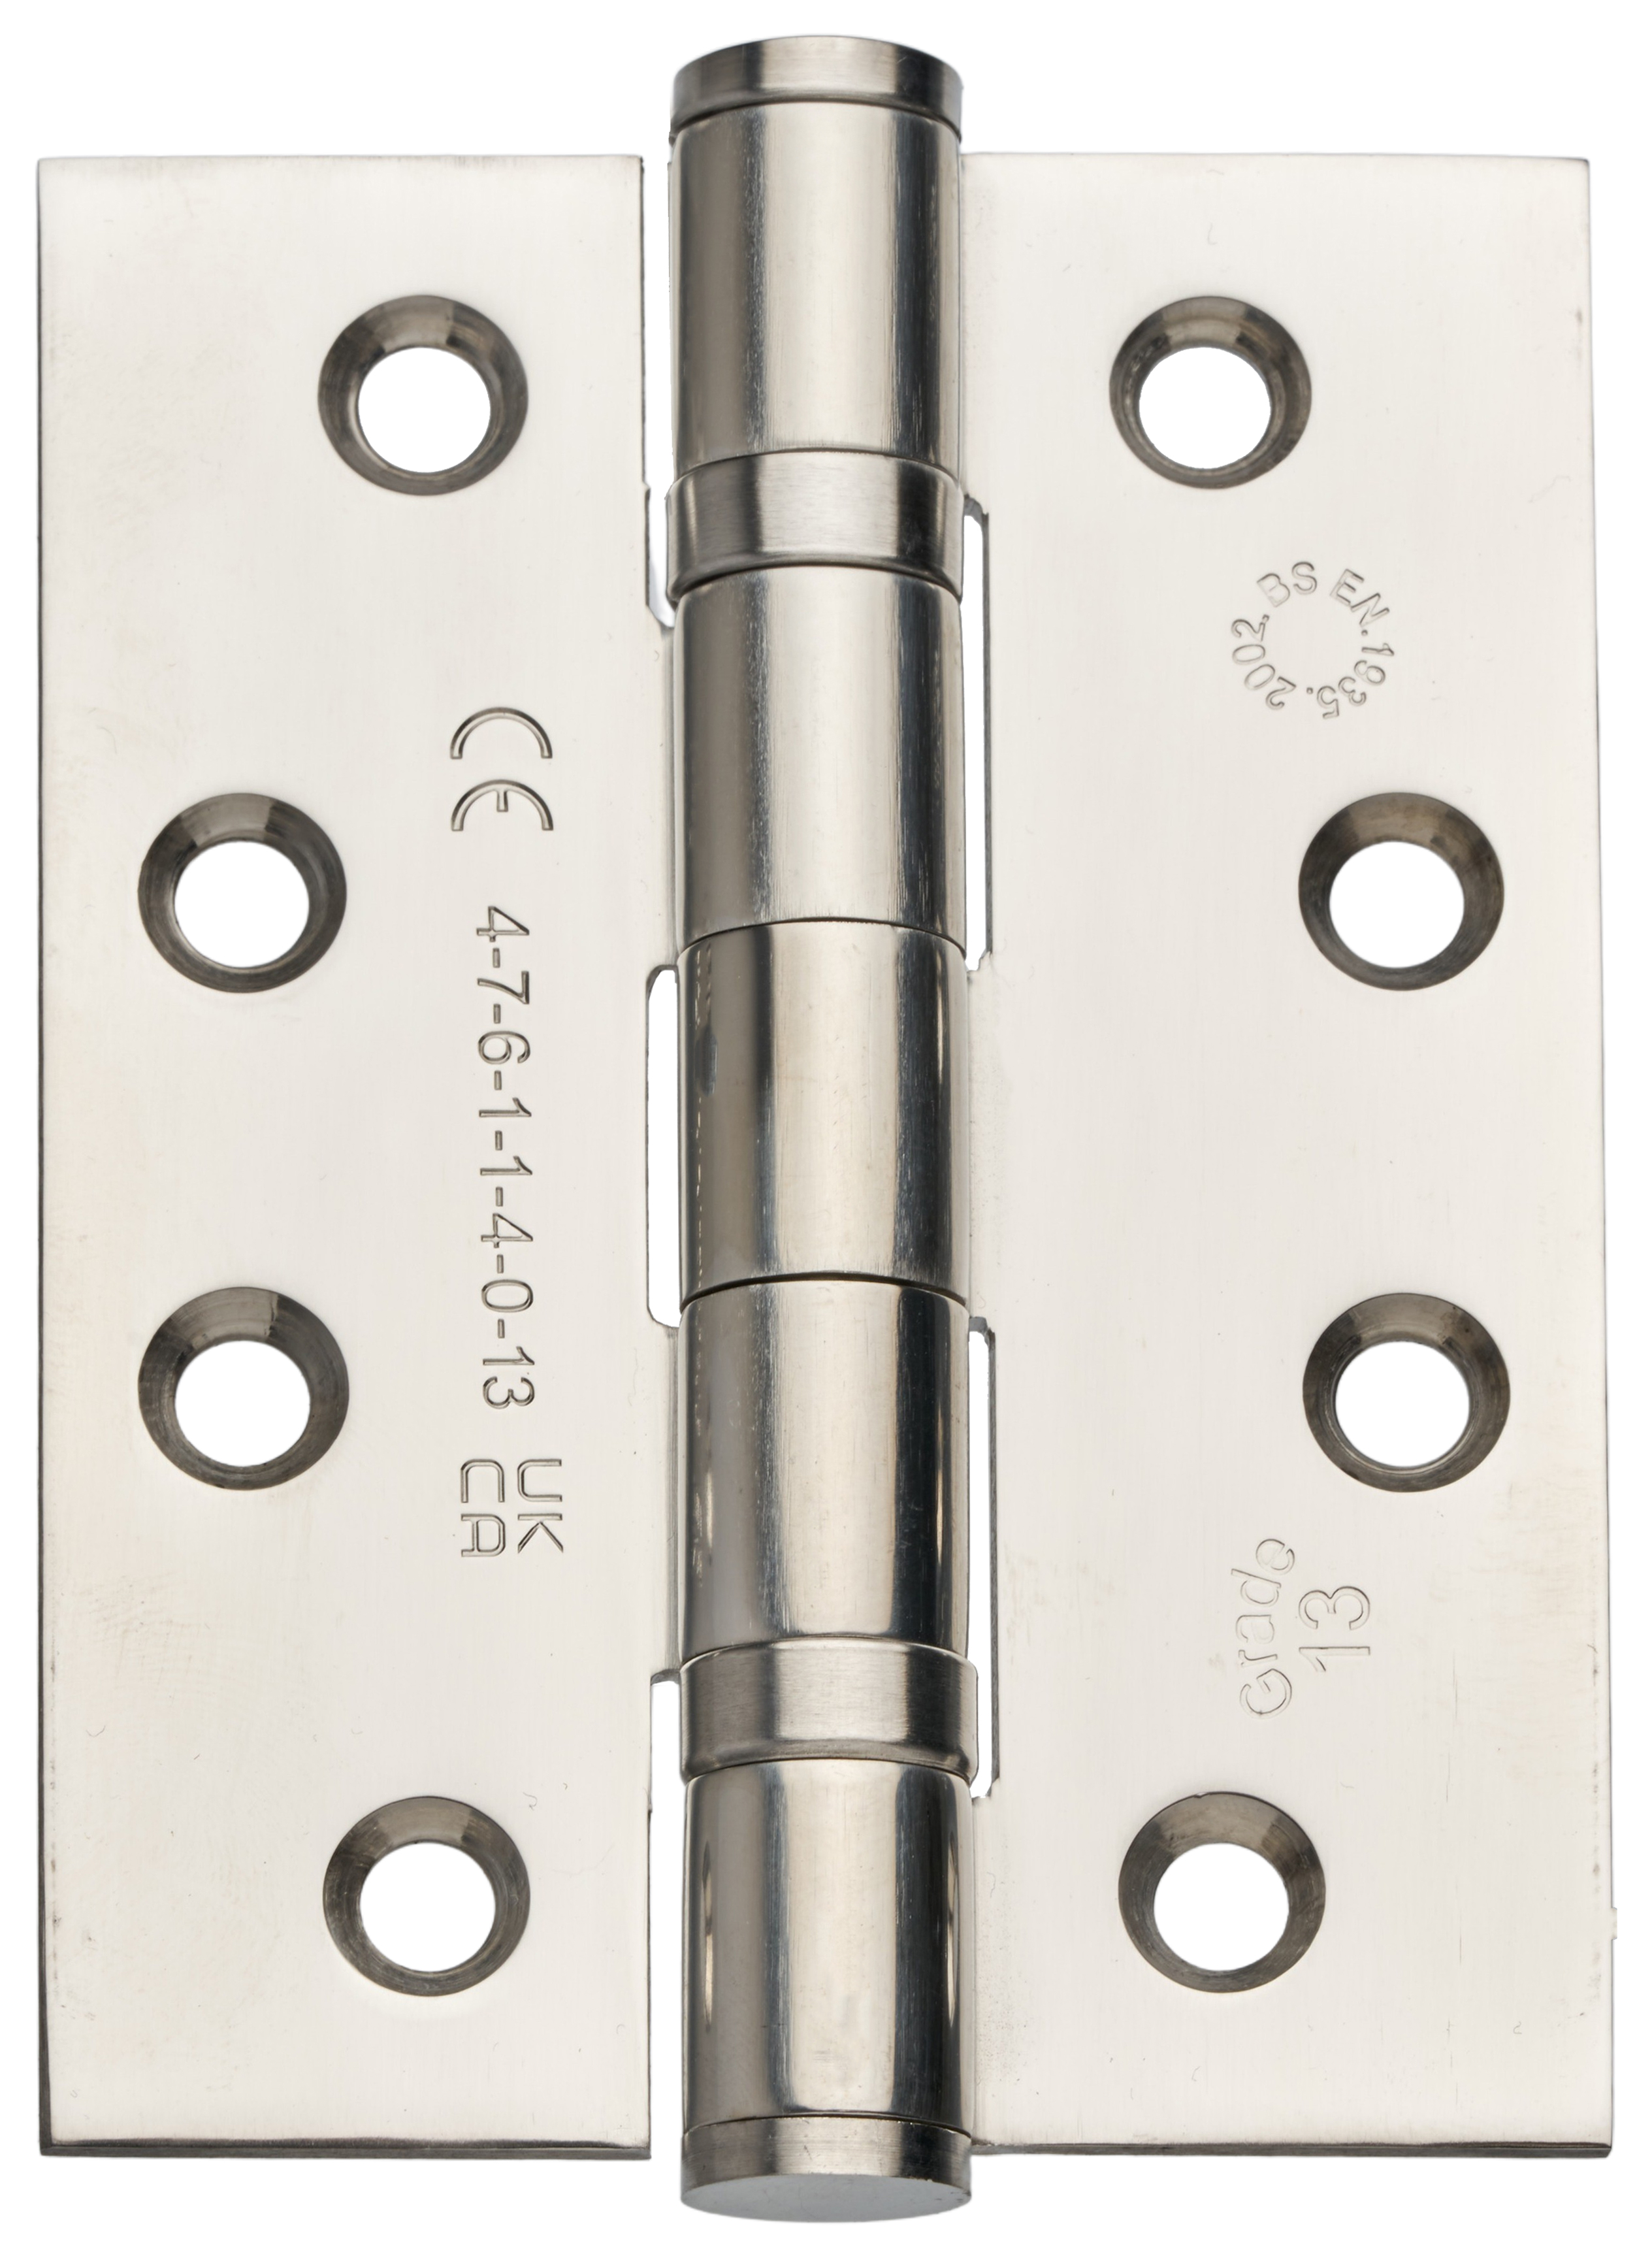 Grade 13 Fire Rated Ball Bearing Hinge Polished Chrome Stainless Steel 102mm - Pack of 3